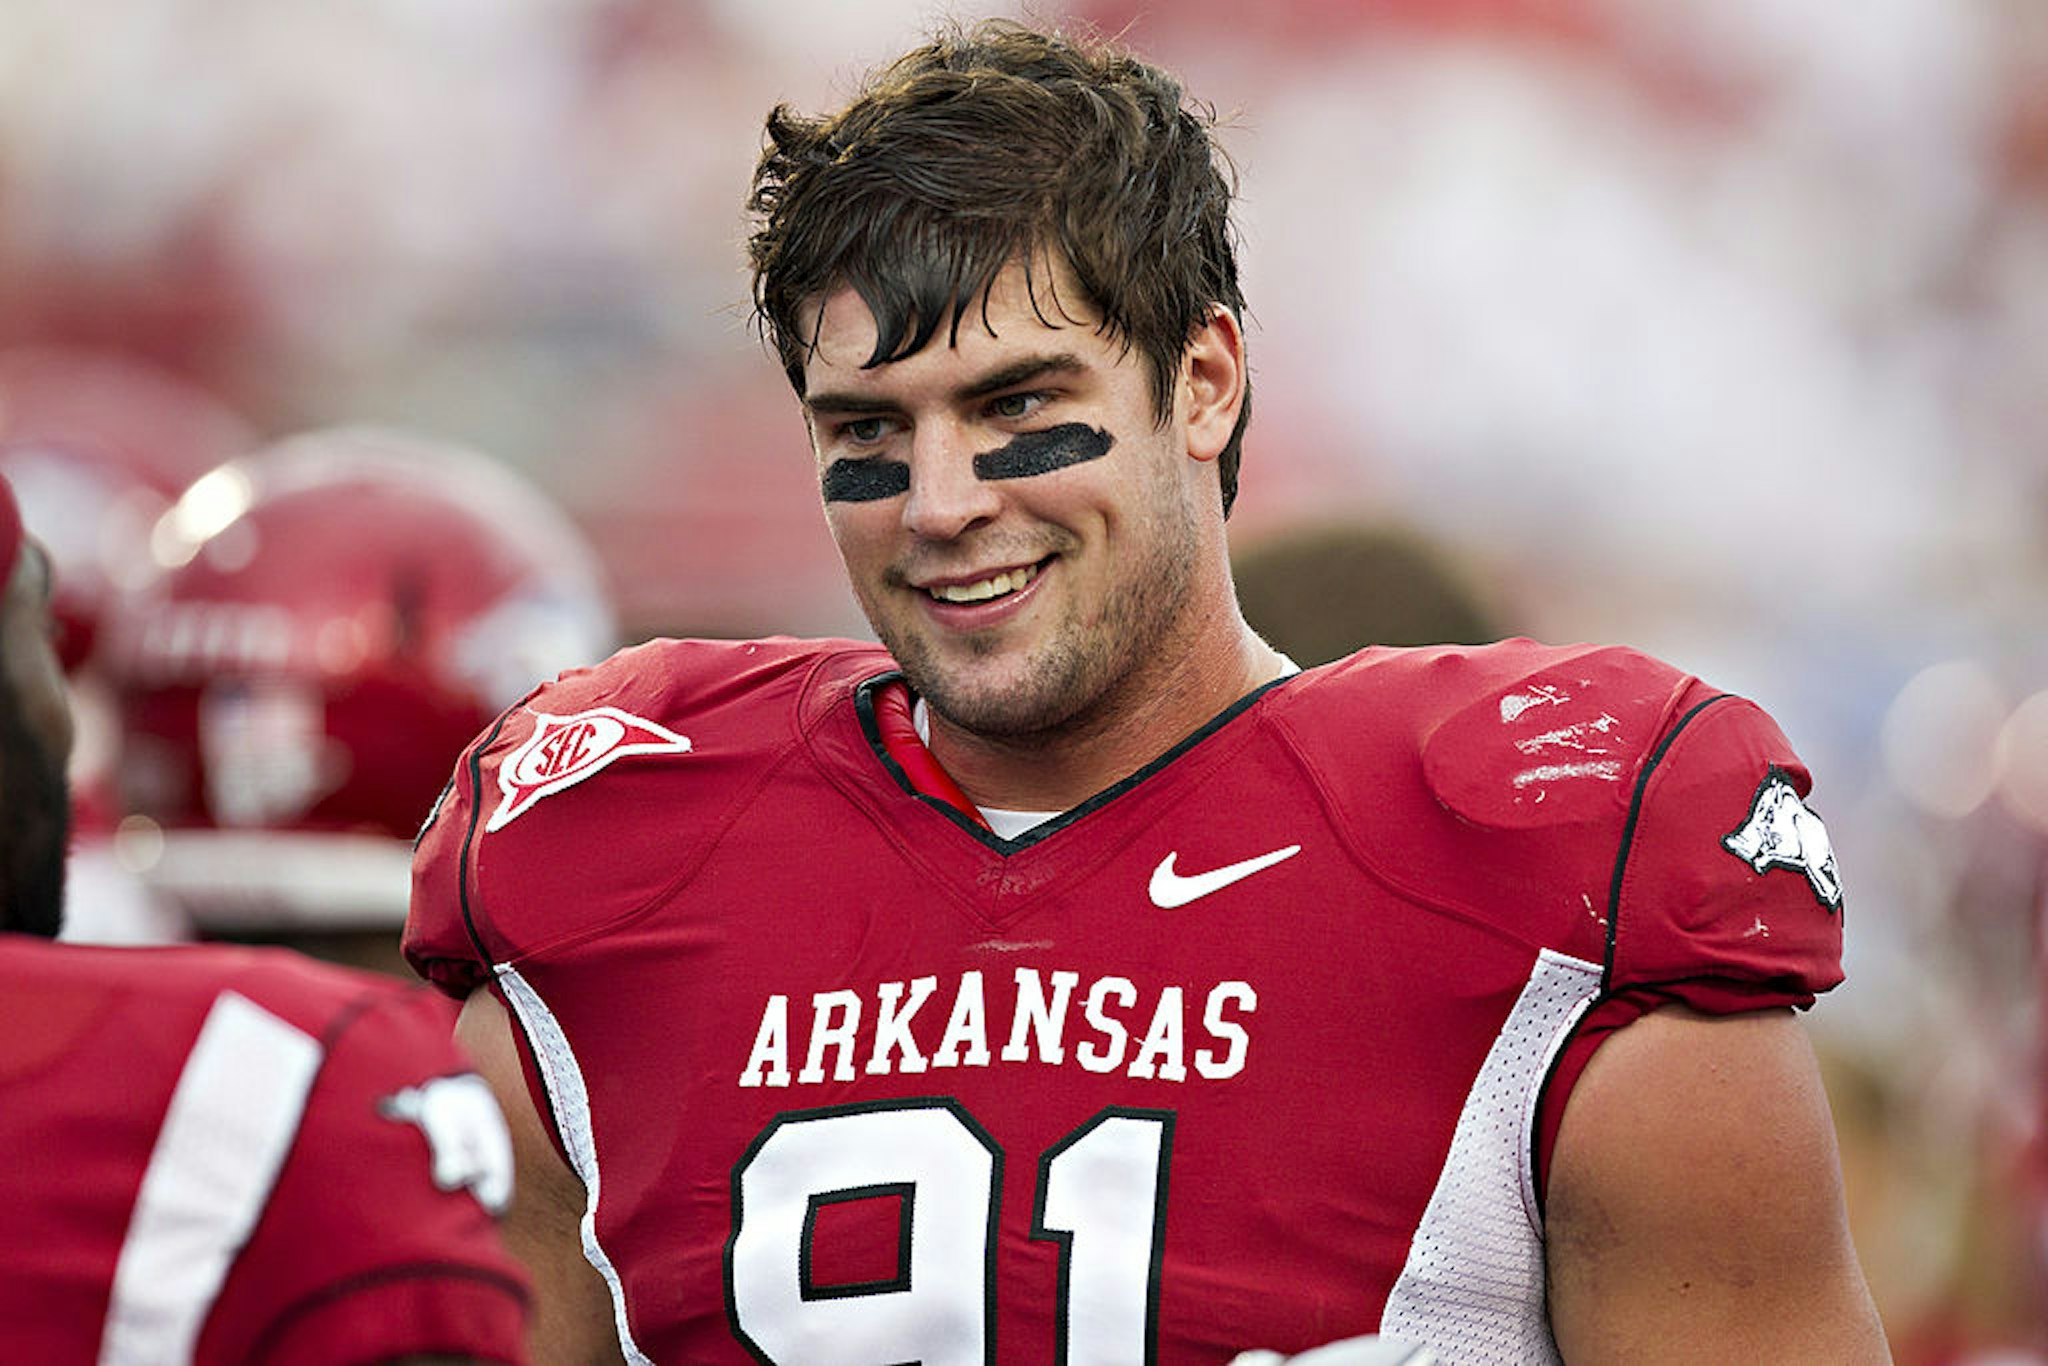 LITTLE ROCK, AR - SEPTEMBER 10: Jake Bequette #91 of the Arkansas Razorbacks warms up before a game against the New Mexico Lobos at War Memorial Stadium on September 10, 2011 in Little Rock, Arkansas. The Razorbacks beat the Lobos 52-3.(Photo by Wesley Hitt/Getty Images)